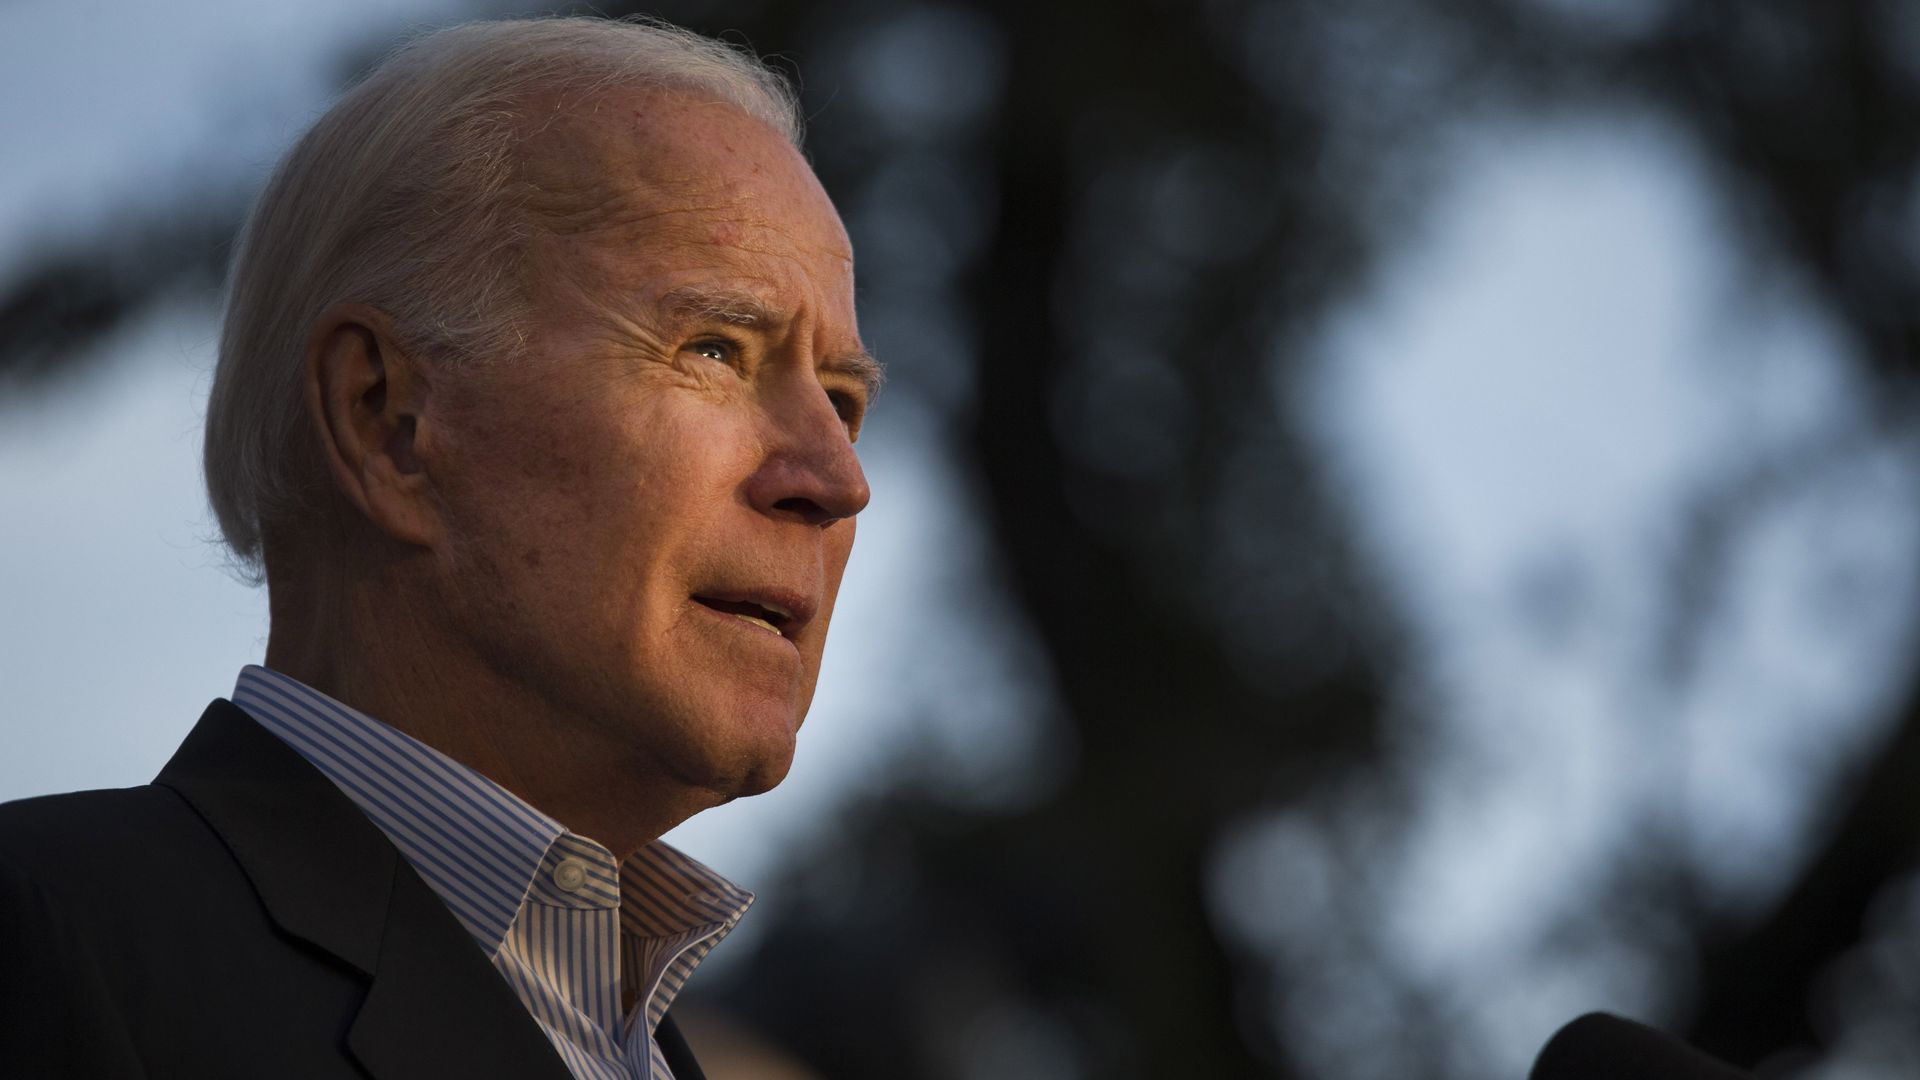 Joe Biden's Medical Report Shows He Is A Healthy, Vigorous, 77 Year Old Male